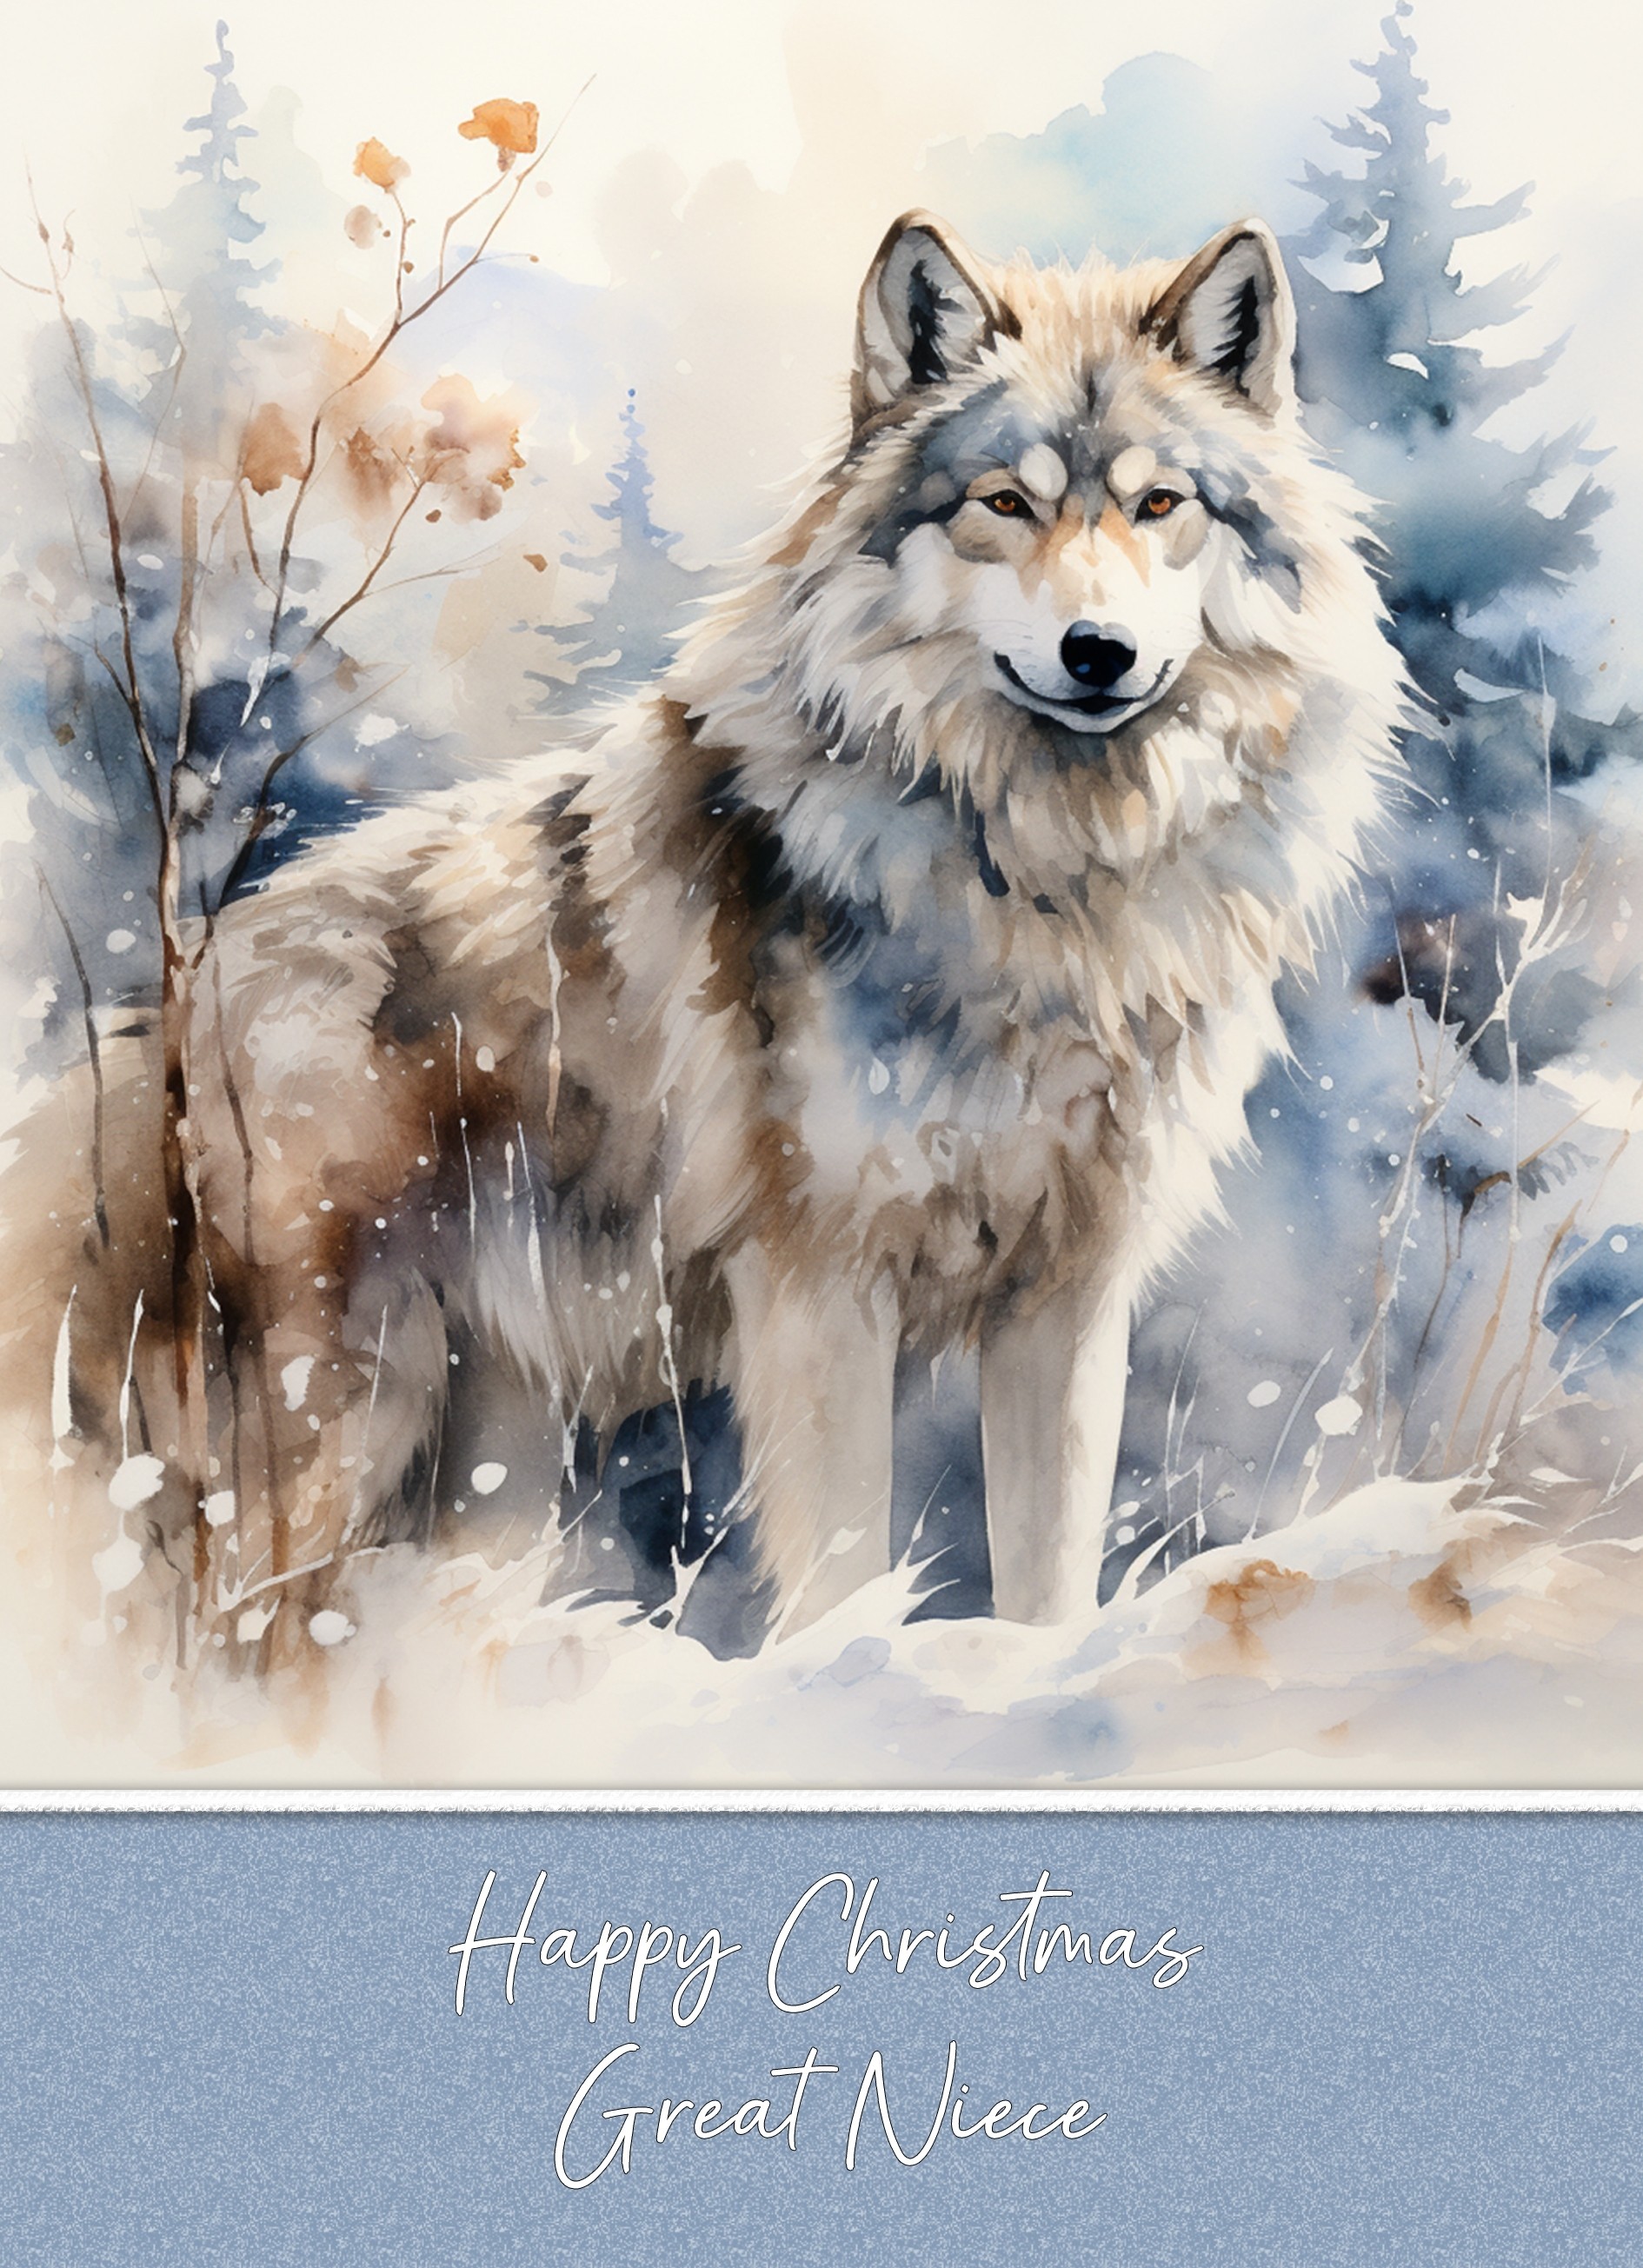 Christmas Card For Great Niece (Fantasy Wolf Art)